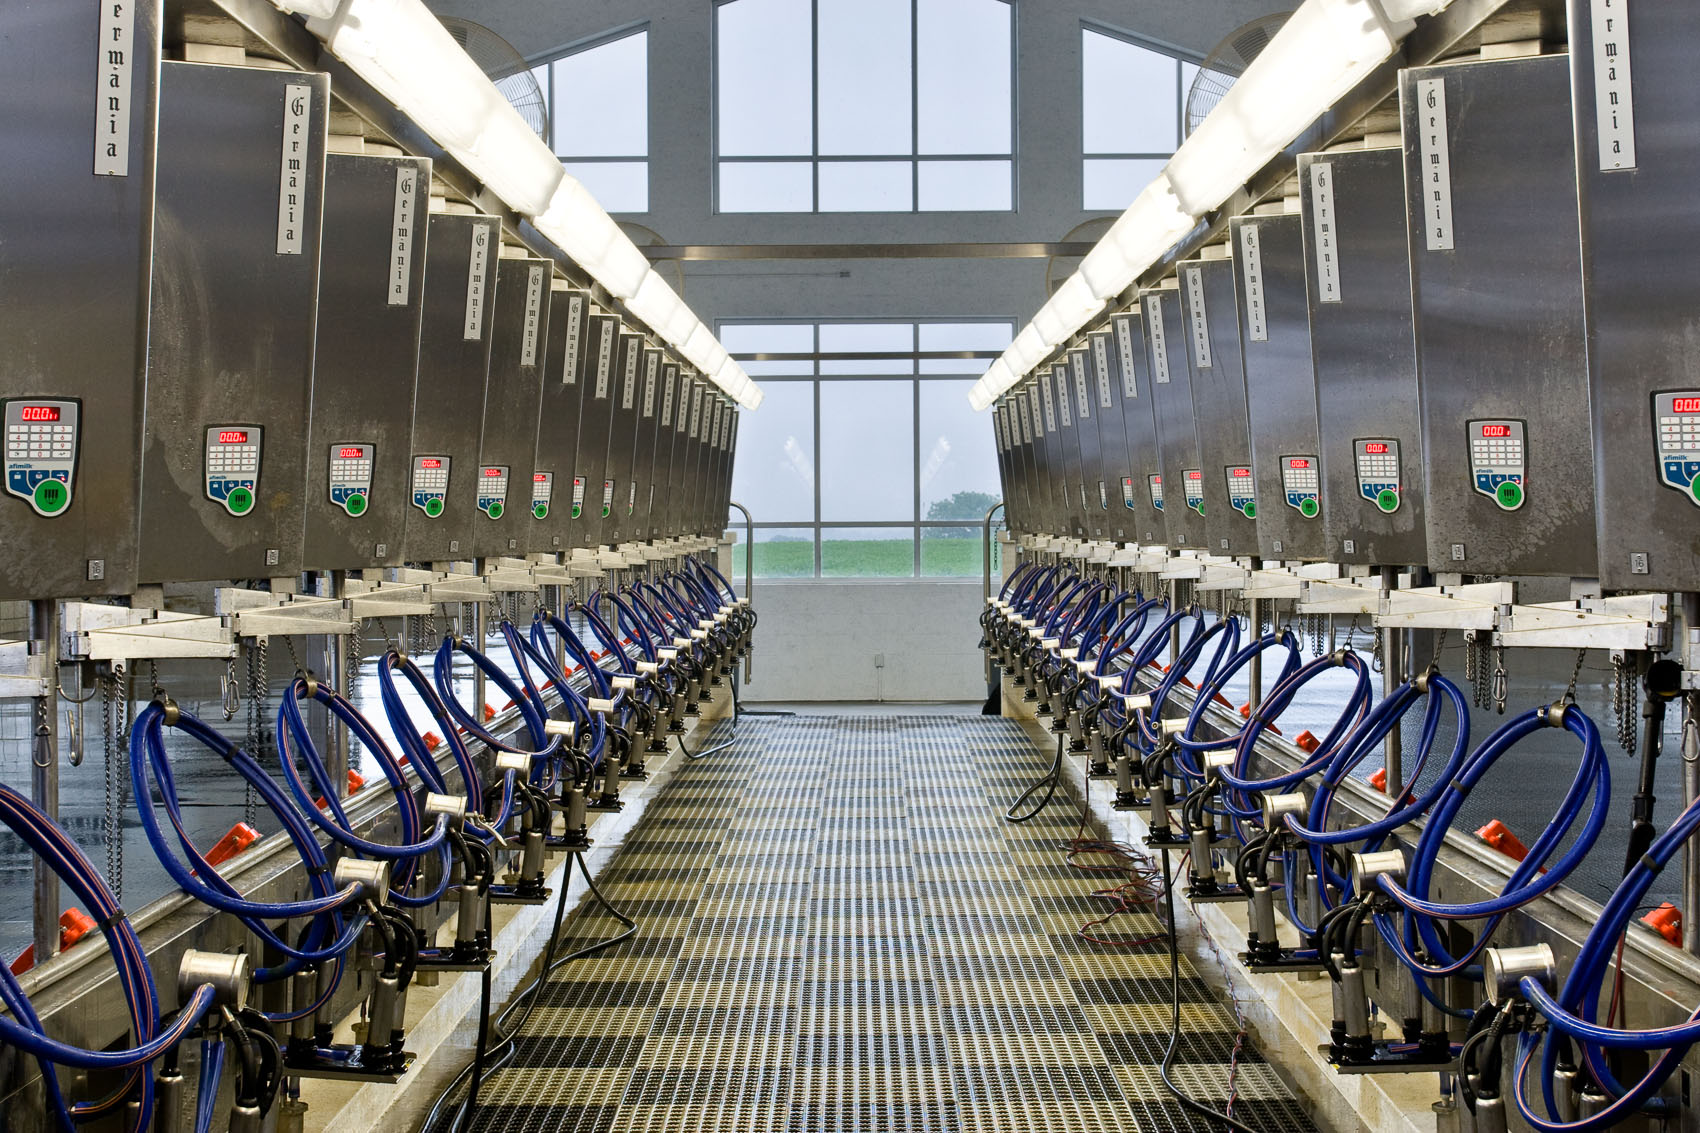 Germania Milking Parlor with AfiMilk Cabinets and Milk Meters at Meadow Lane Dairy Farm in Lancaster, PA | J. Eldon Zimmerman Photography | Lancaster, PA Agriculture Photographer